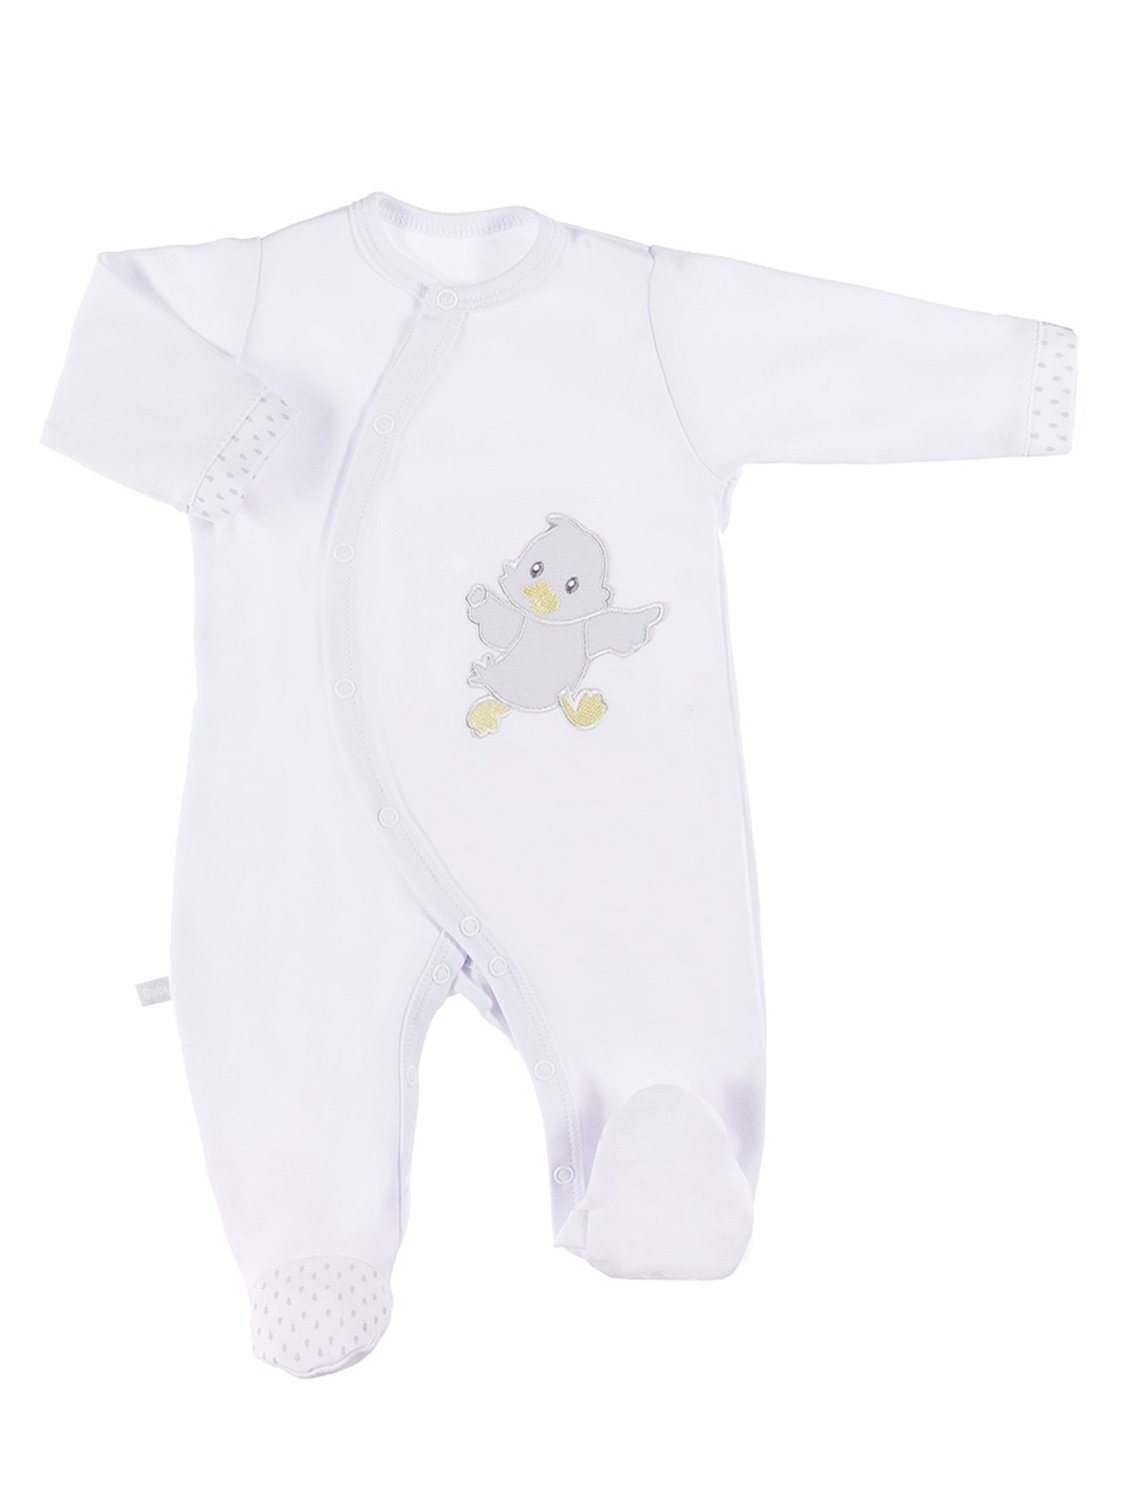 Tiny Baby Footed Babygrow, Embroidered Chick - White Sleepsuit / Babygrow EEVI 